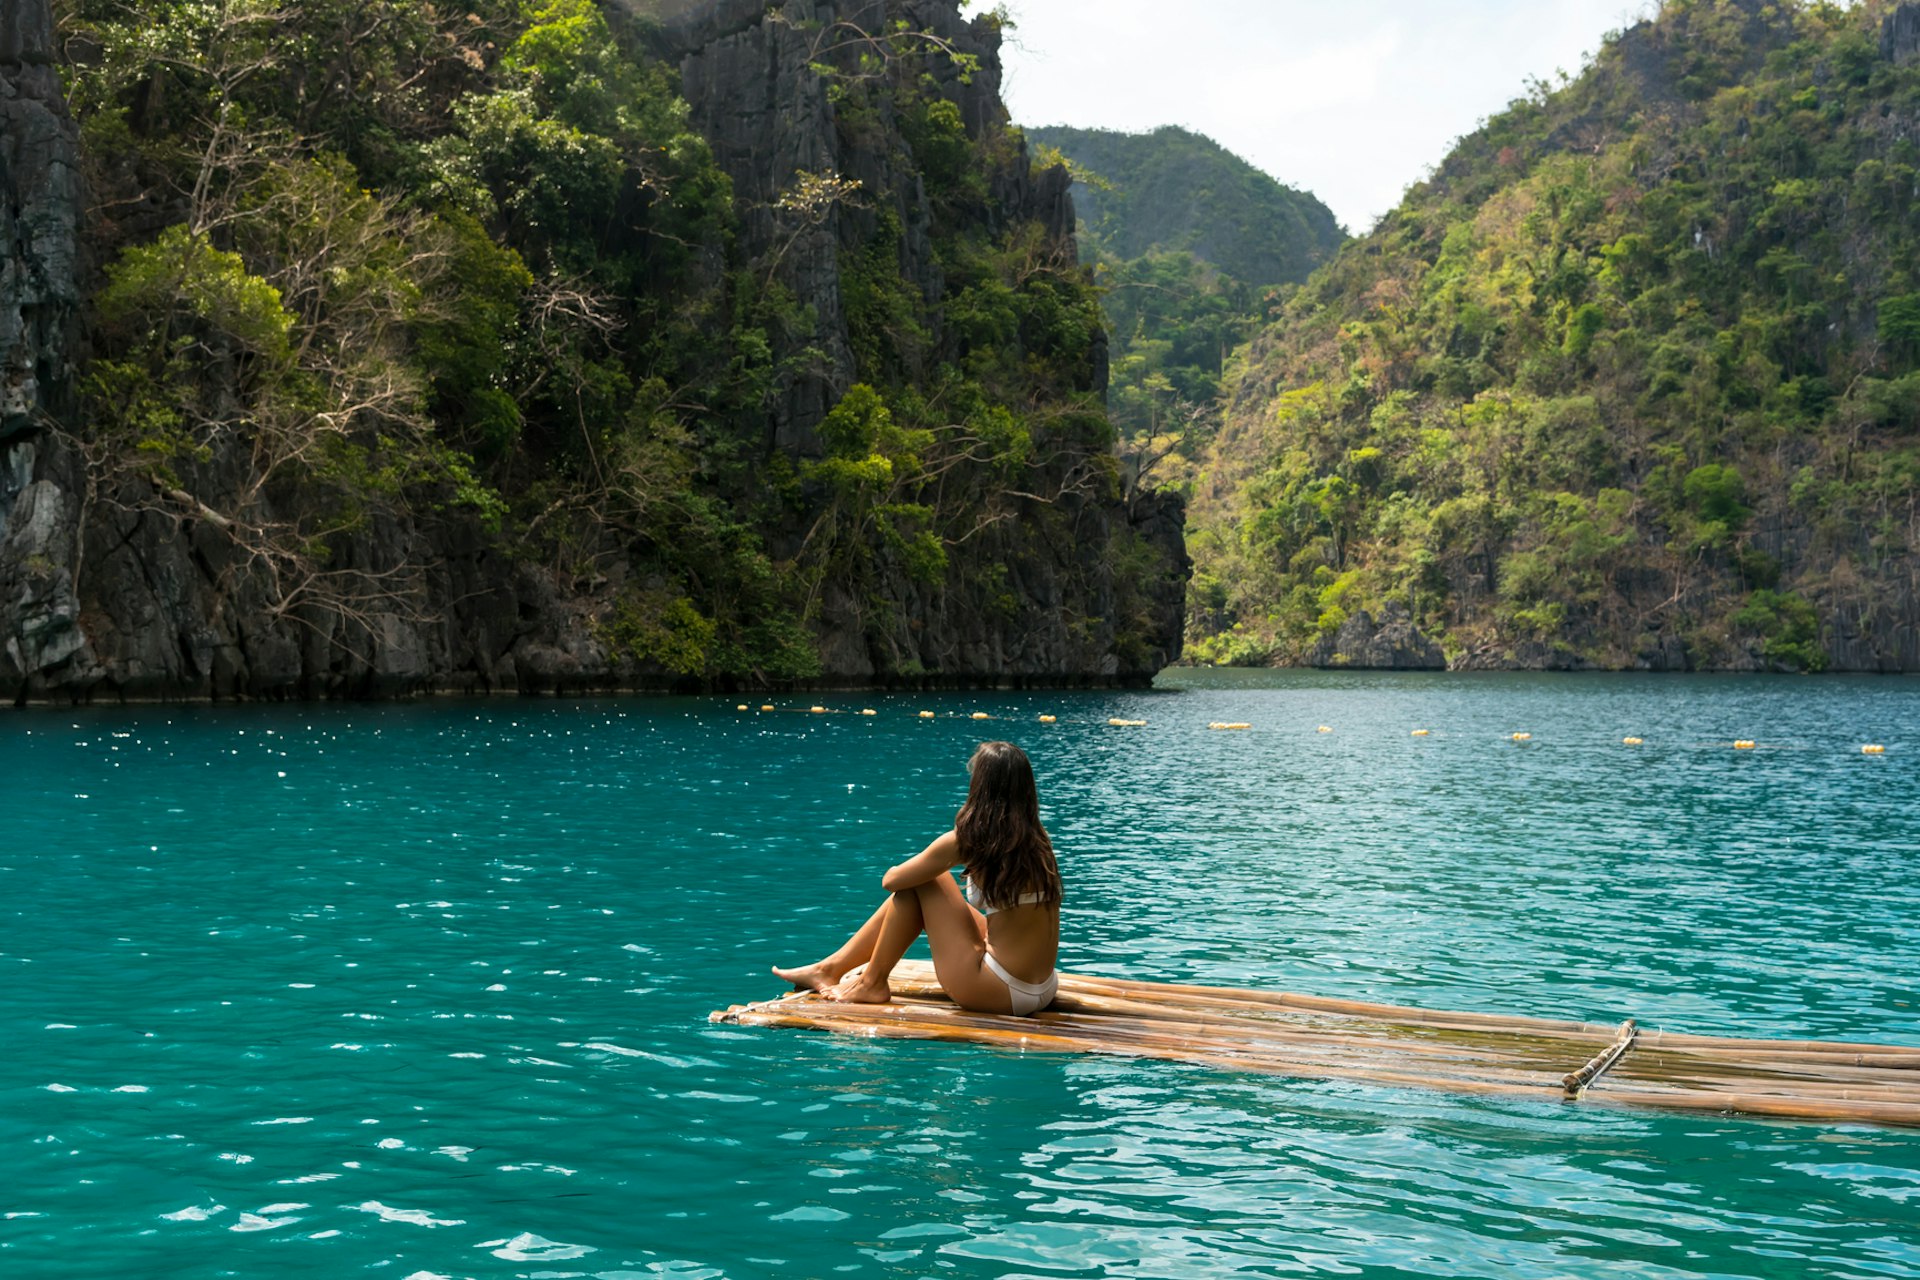 A woman sits by the water in Coron, Palawan, the Philippines